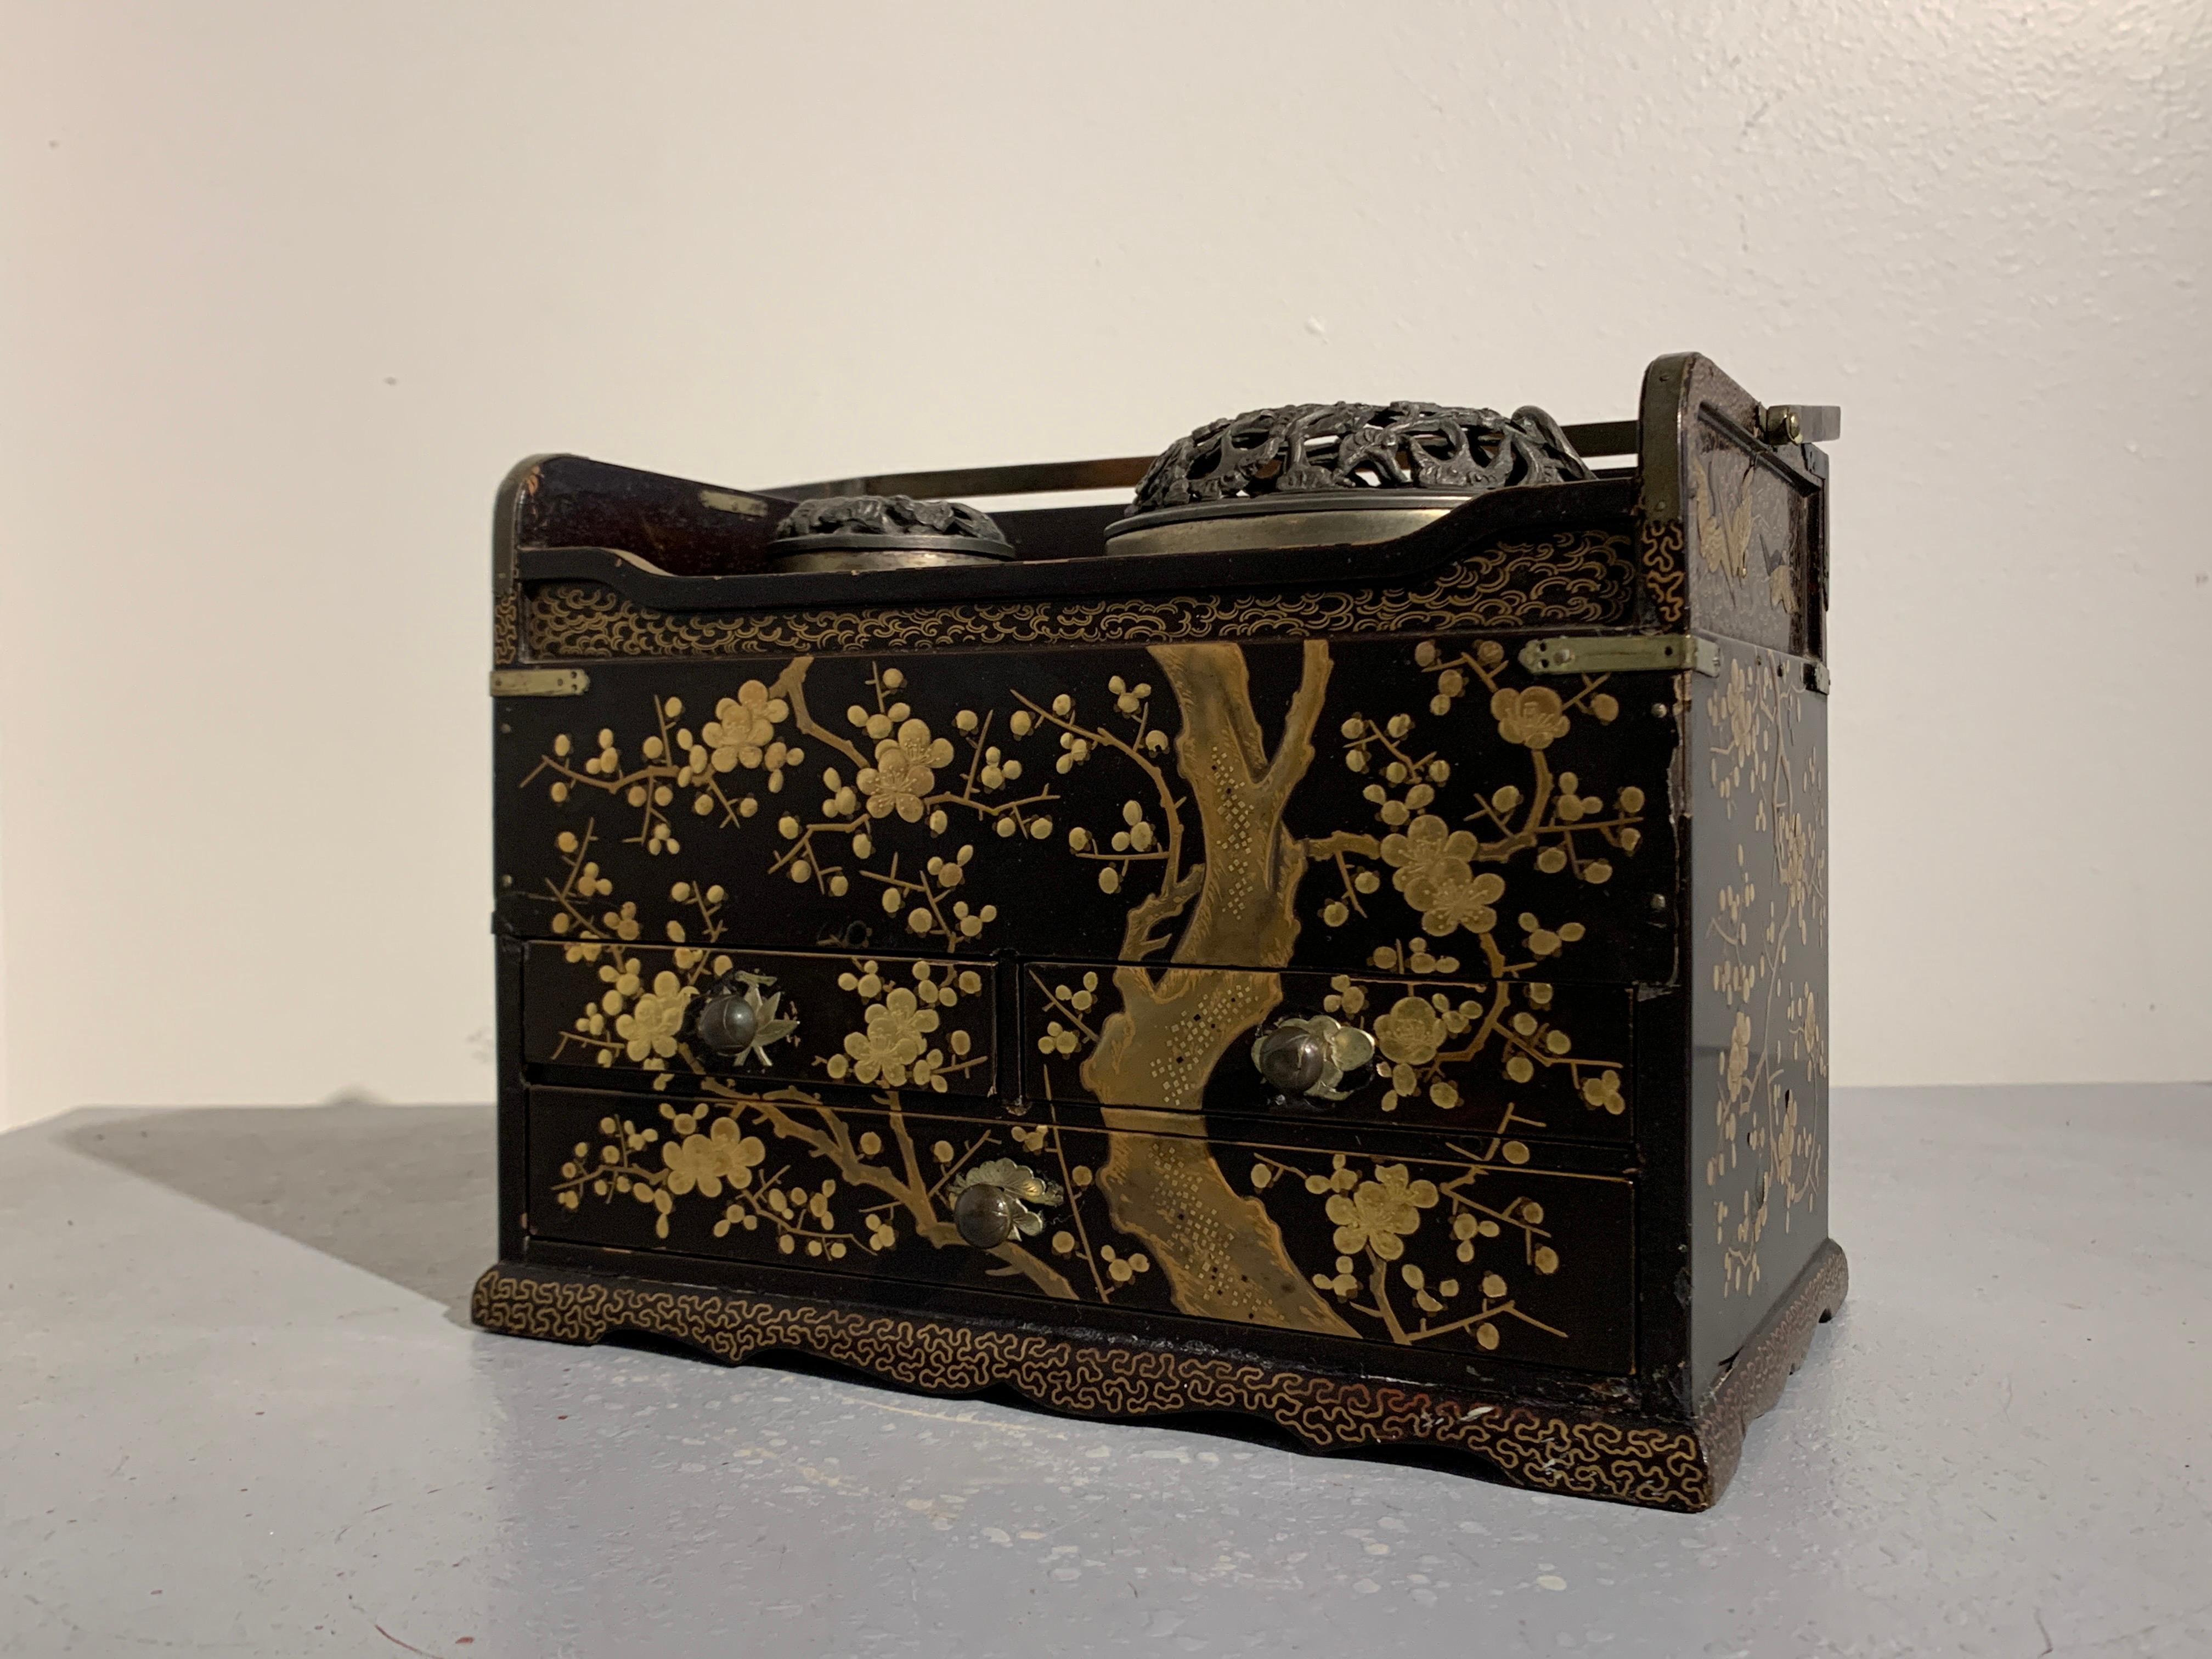 A very fine Japanese maki-e lacquer decorated tabako bon, or smoking box, late Edo Period, mid-19th century, Japan.

The elegant smoking box of black lacquer decorated with a wonderful gold lacquer takamaki-e design of a gnarled and elegantly